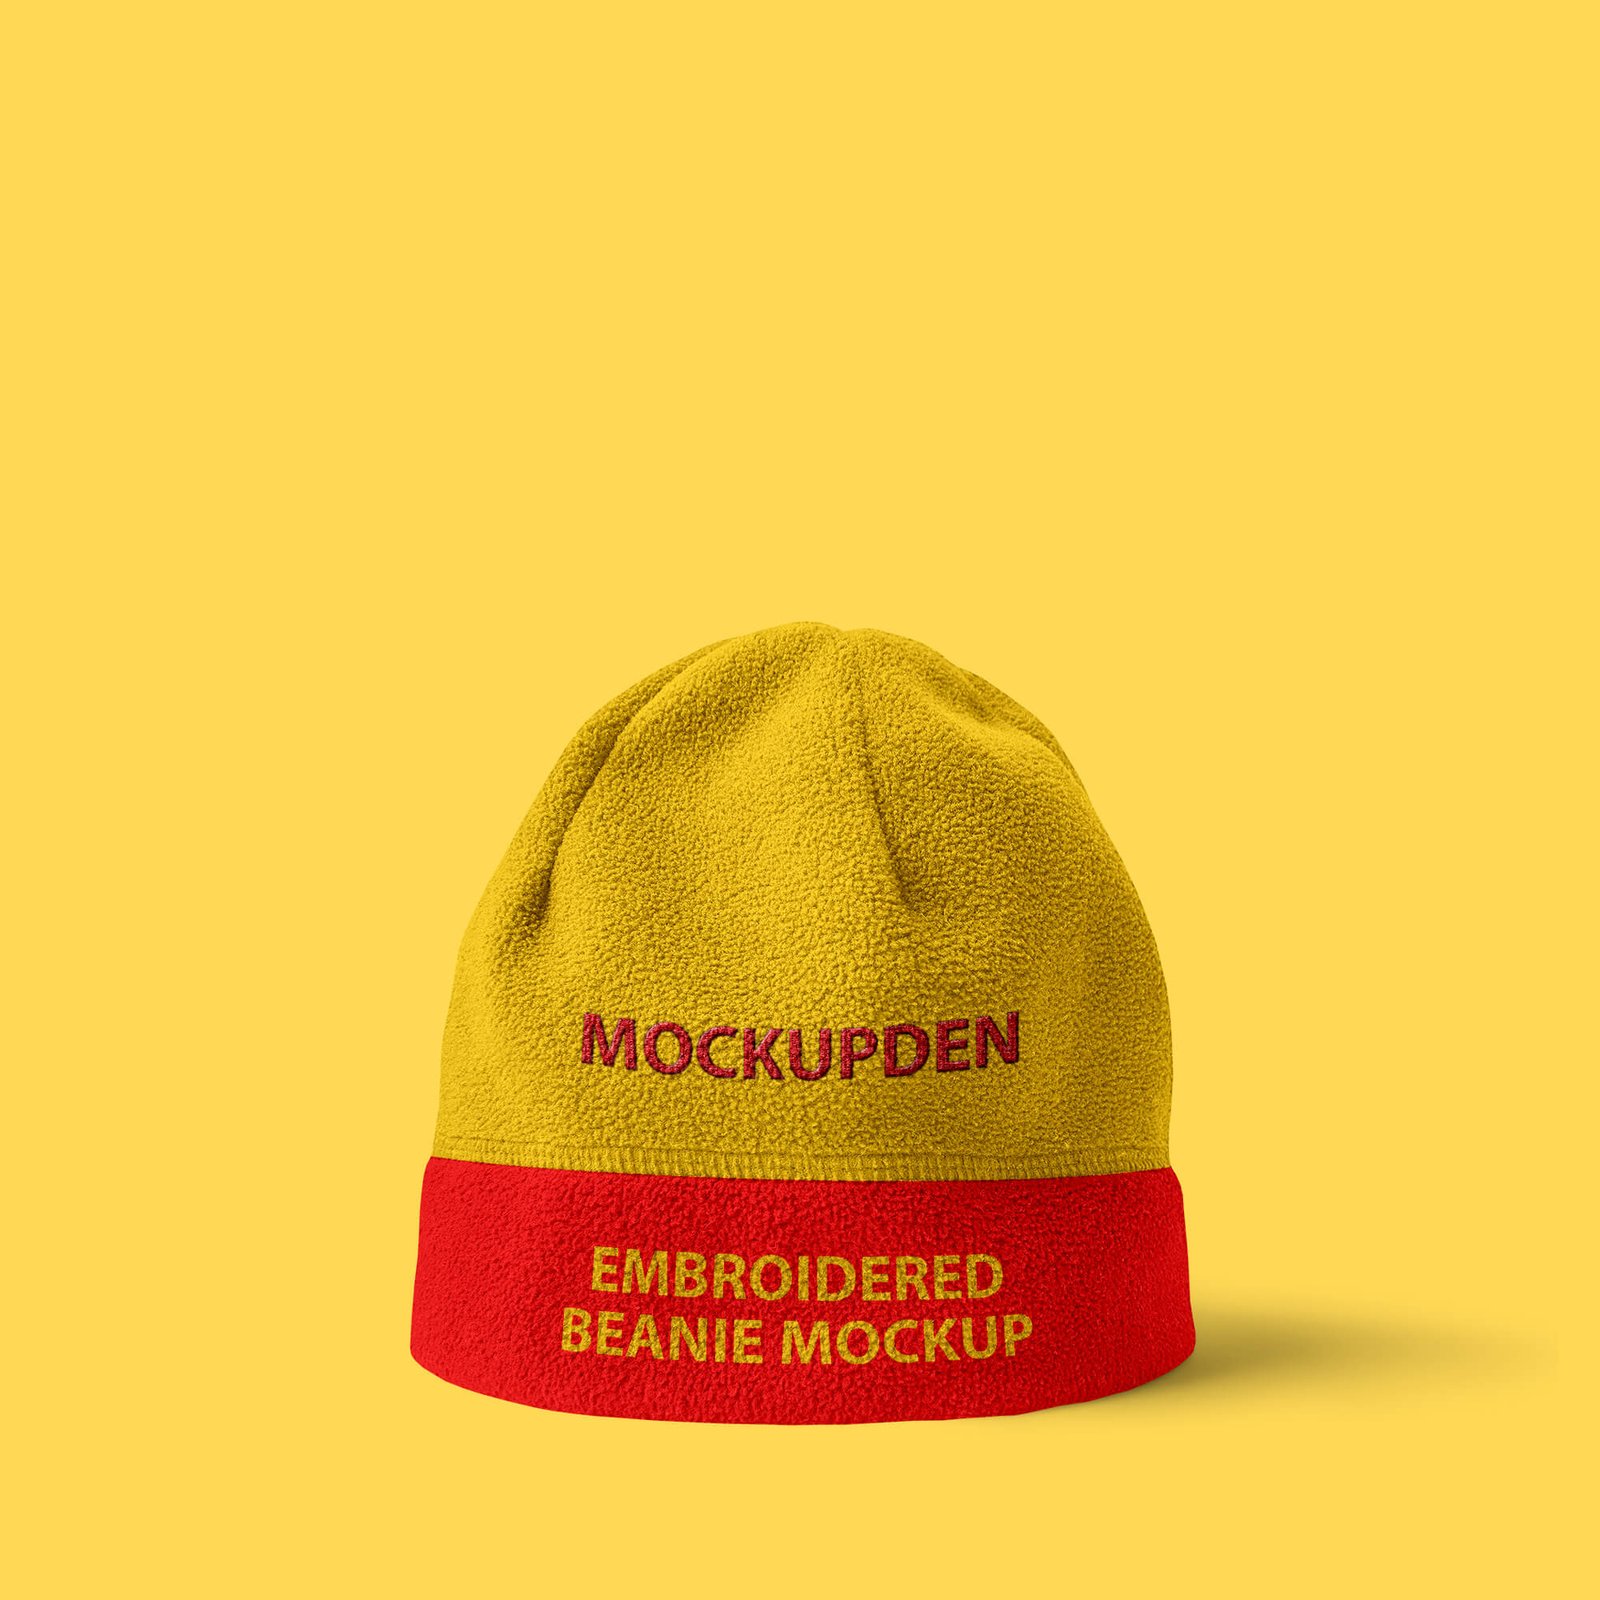 Design Free Embroidered Beanie Mockup PSD Template